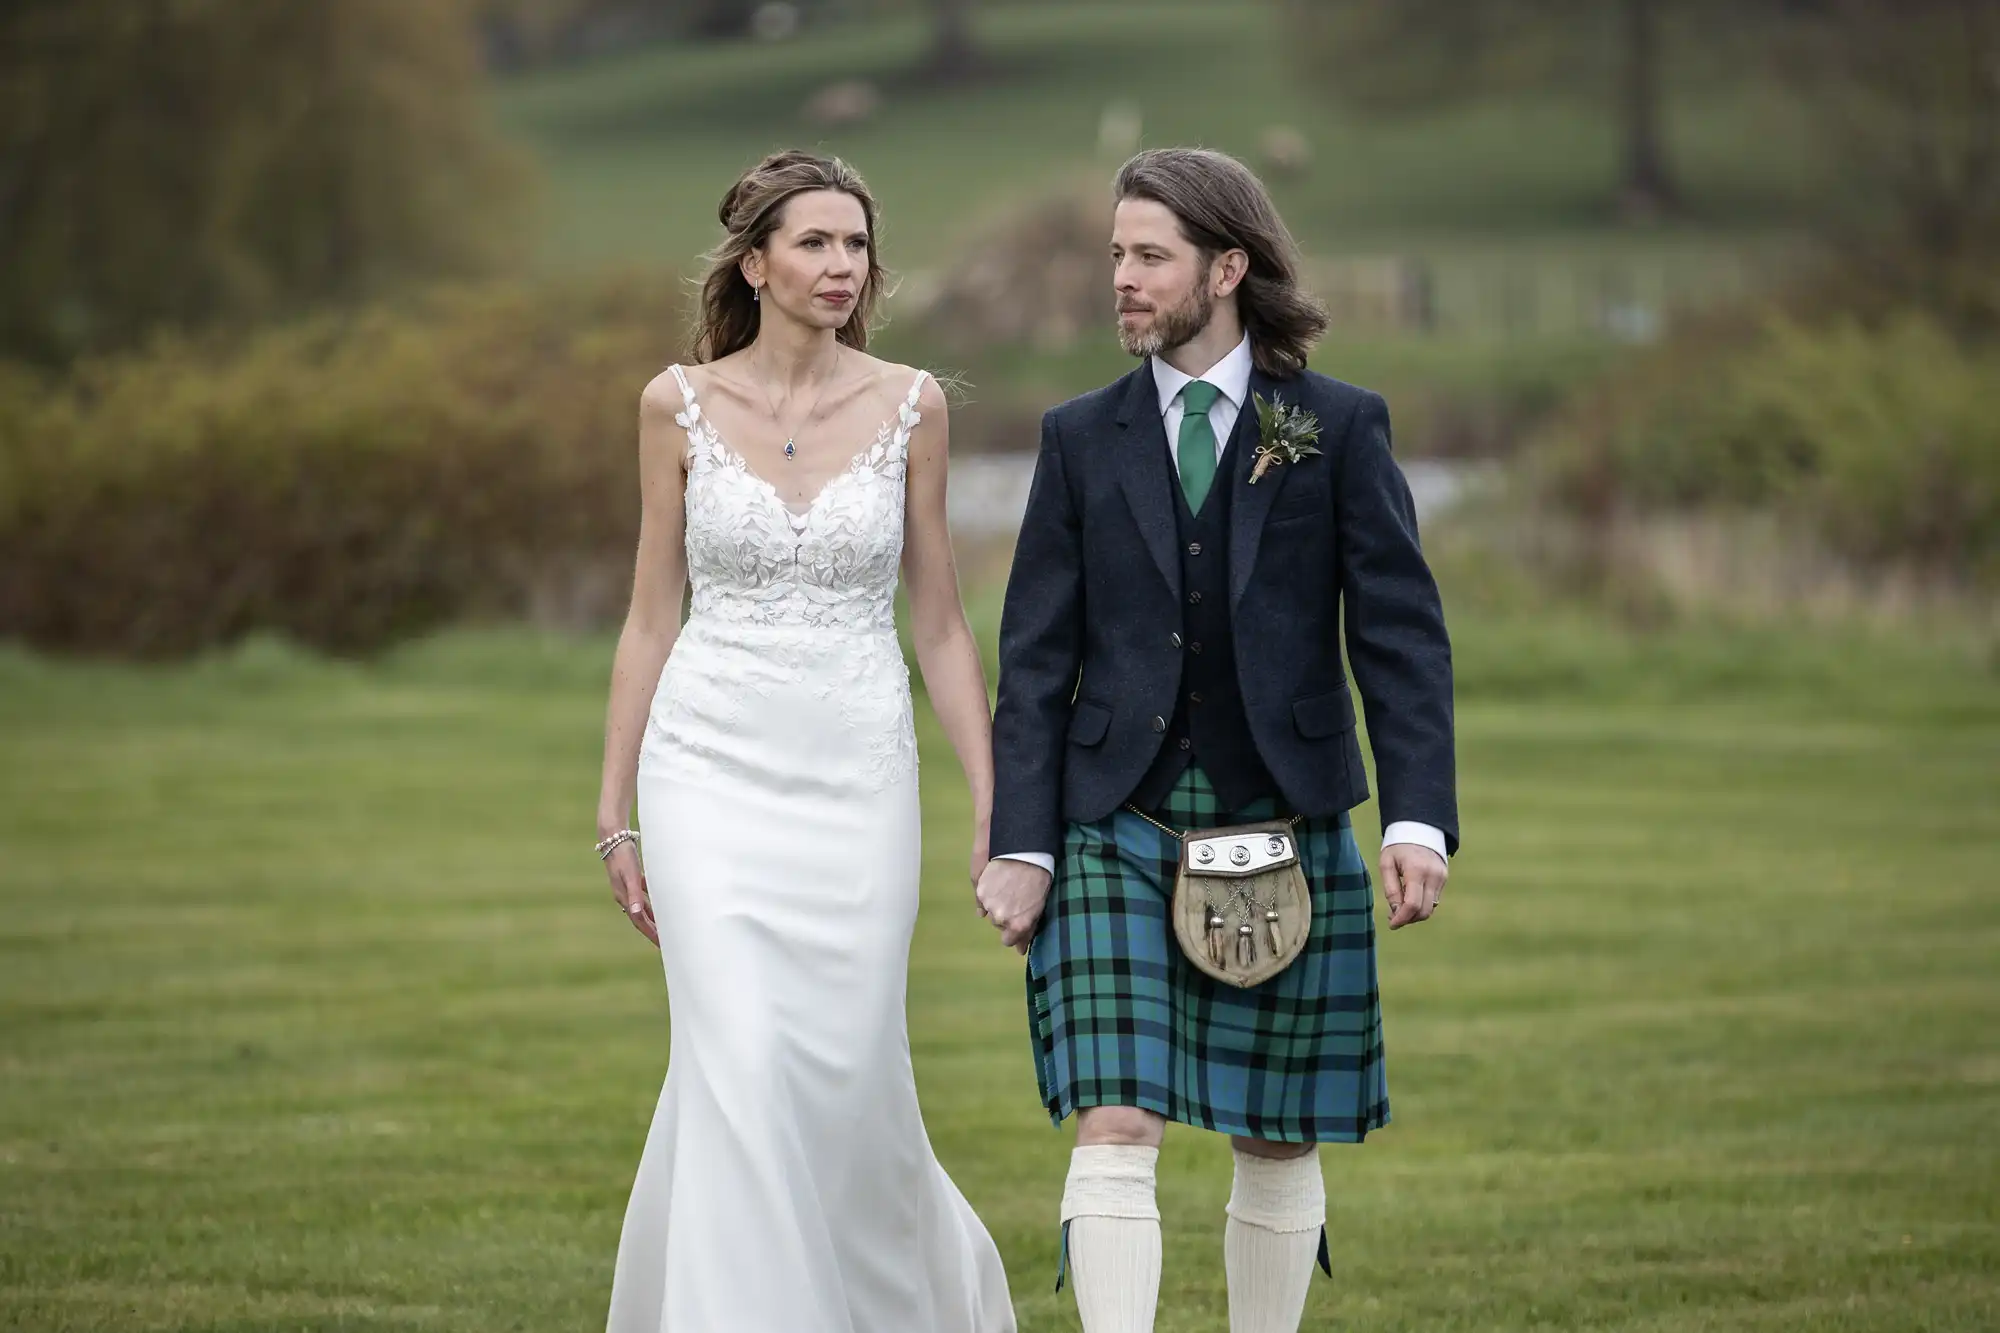 A bride in a white dress and a groom in a kilt walk hand-in-hand on a grassy field.